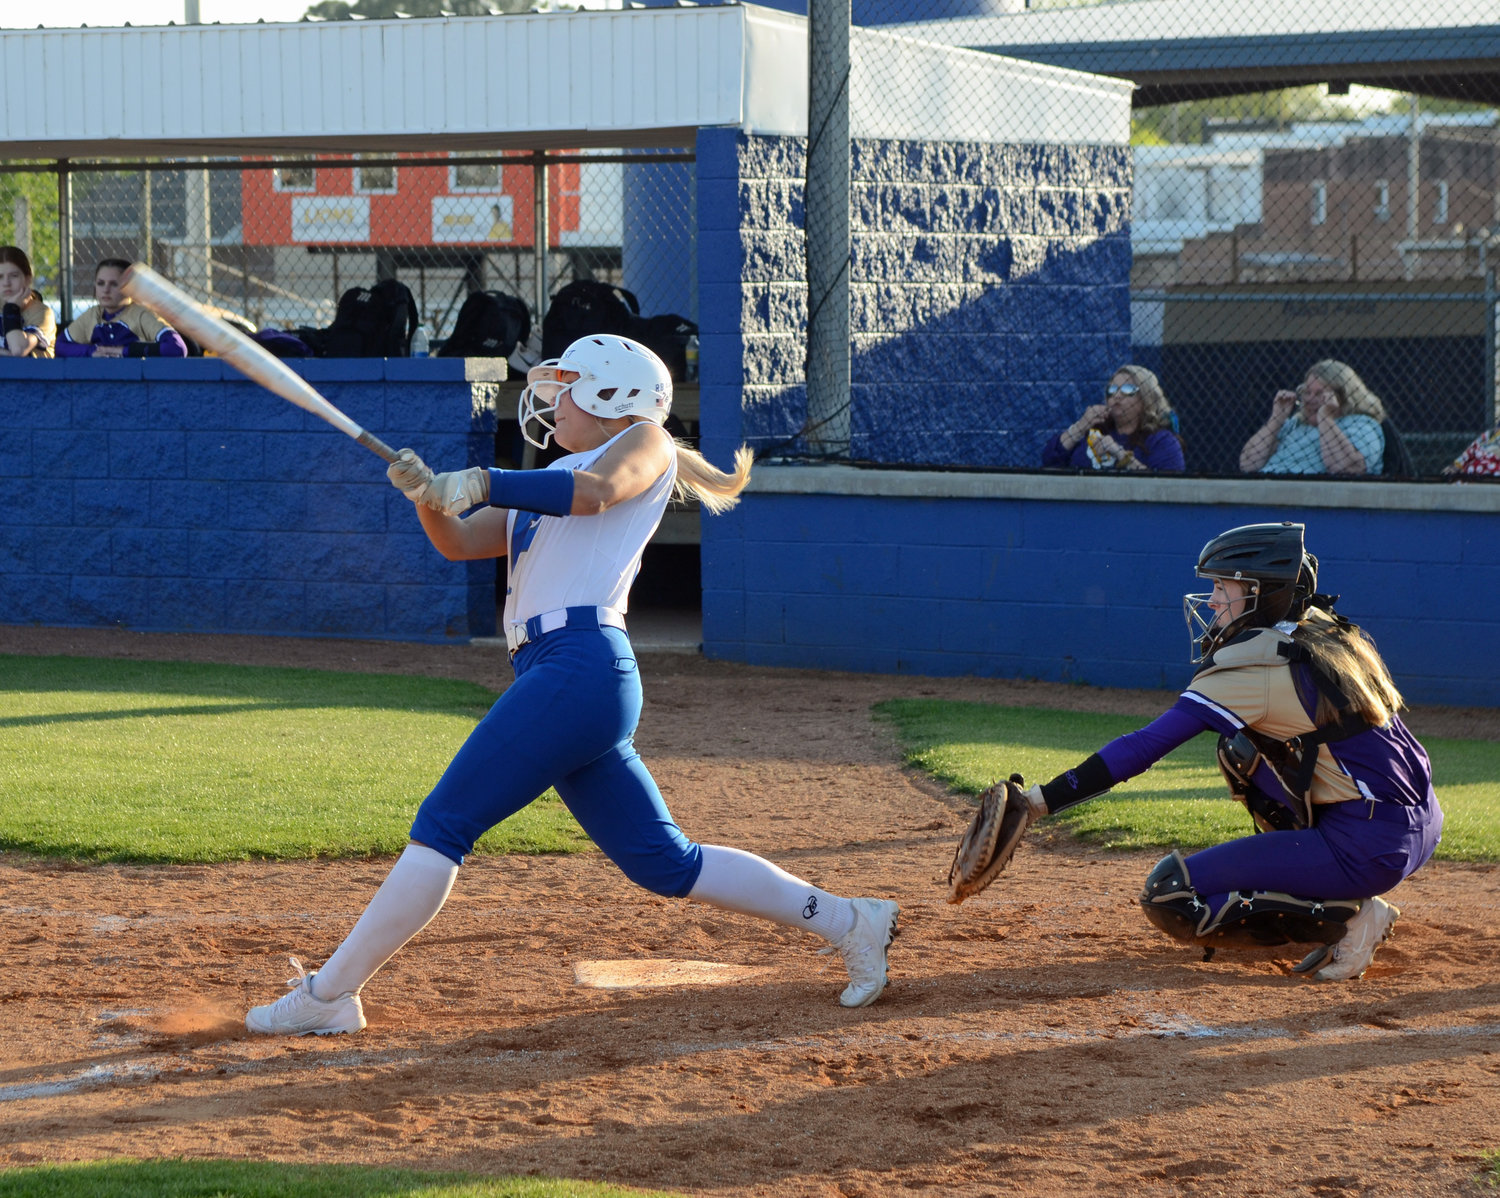 Abby Ferguson bashes a two-run homerun in the bottom of the third inning.